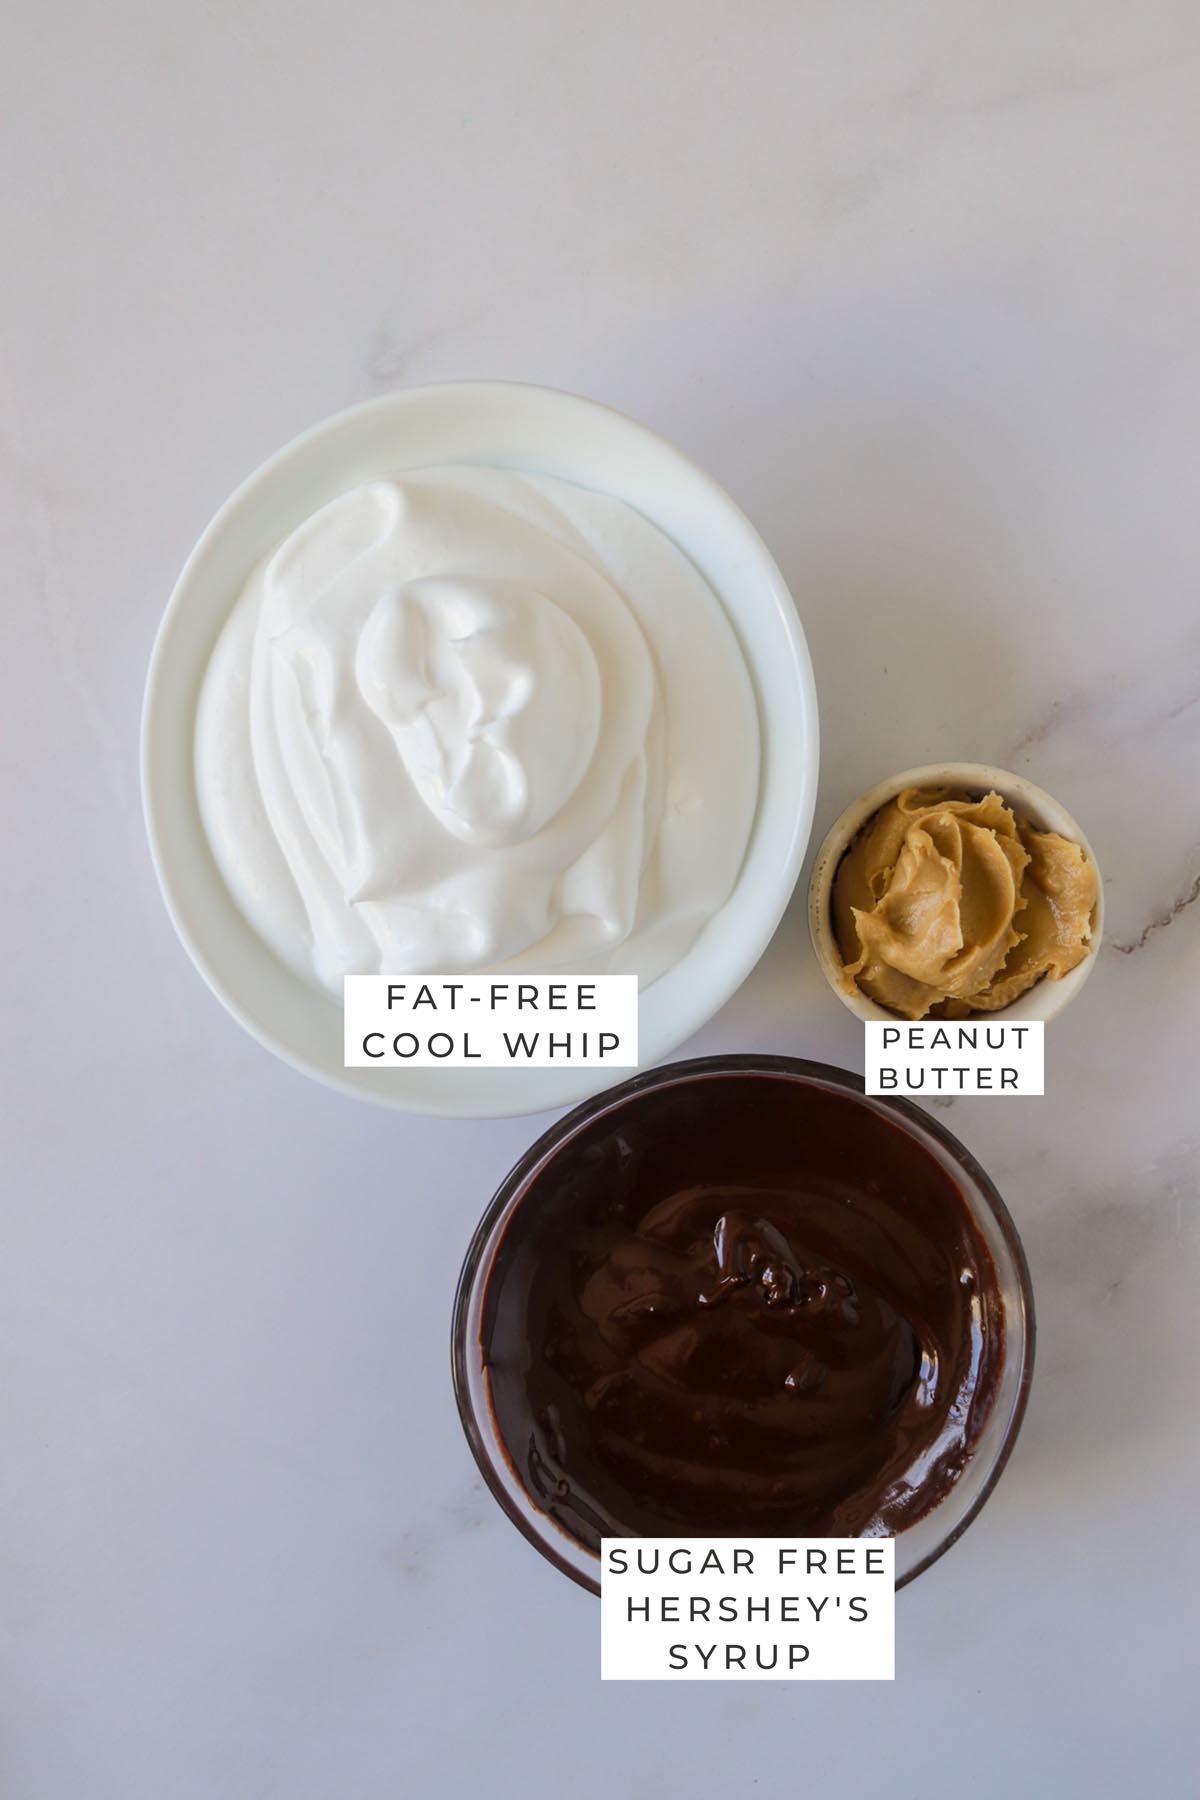 Labeled ingredients for the Cool Whip treats.